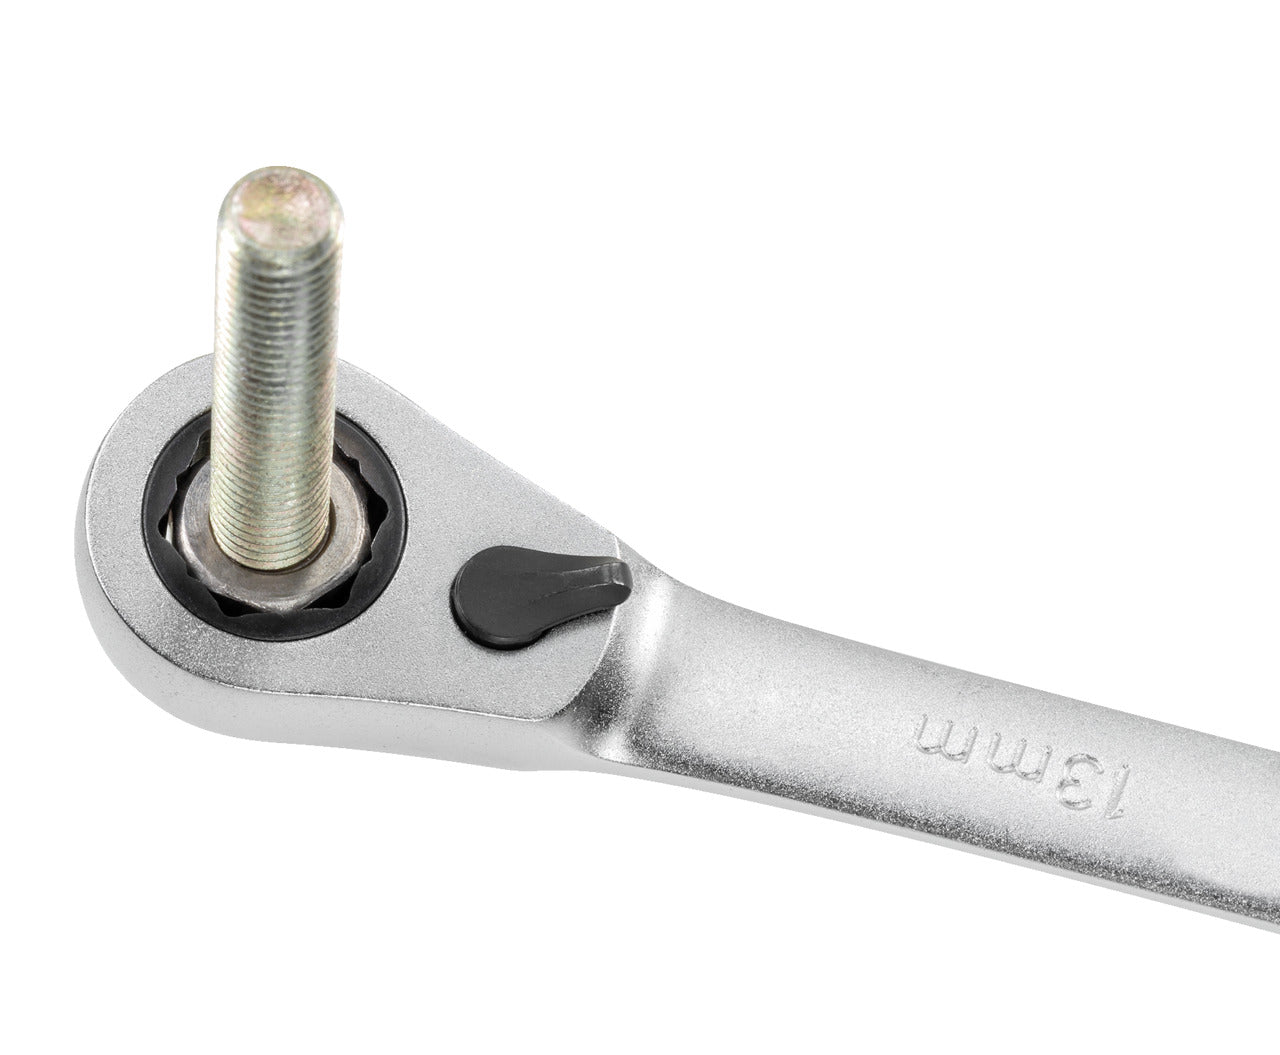 GEDOREred R07201190 - Reversible ratchet combination wrench with clamping function, 19mm (3301007)